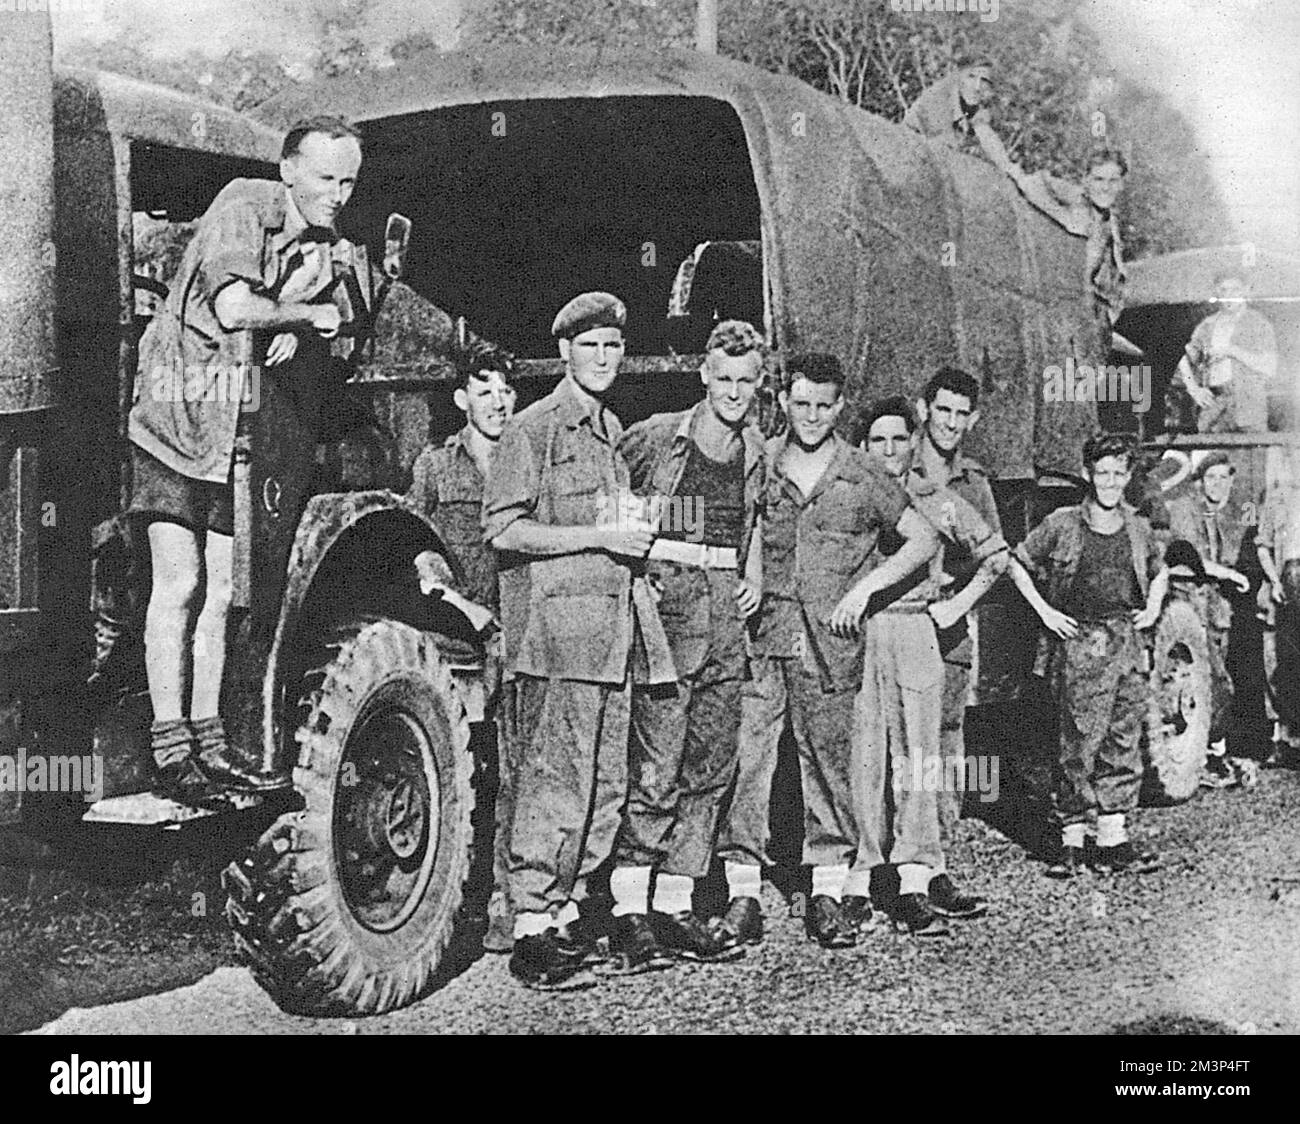 Some of the paratroopers, convicted of mutiny, pictured following their release.   In May 1946, at the Muar Camp in Malaya, over 250 privates refused to obey orders and were later charged with mutiny. Three were acquitted, eight sentenced to five years penal servitude and the rest two years imprisonment. The sentencing led to an outcry in the U.K. and M.P.s challenged the War Minister with regard to the legality of the trial. Two days after sentencing, the Judge Advocate-General quashed the sentences due to irregularities that made the trial unsatisfactory.     Date: 1946 Stock Photo